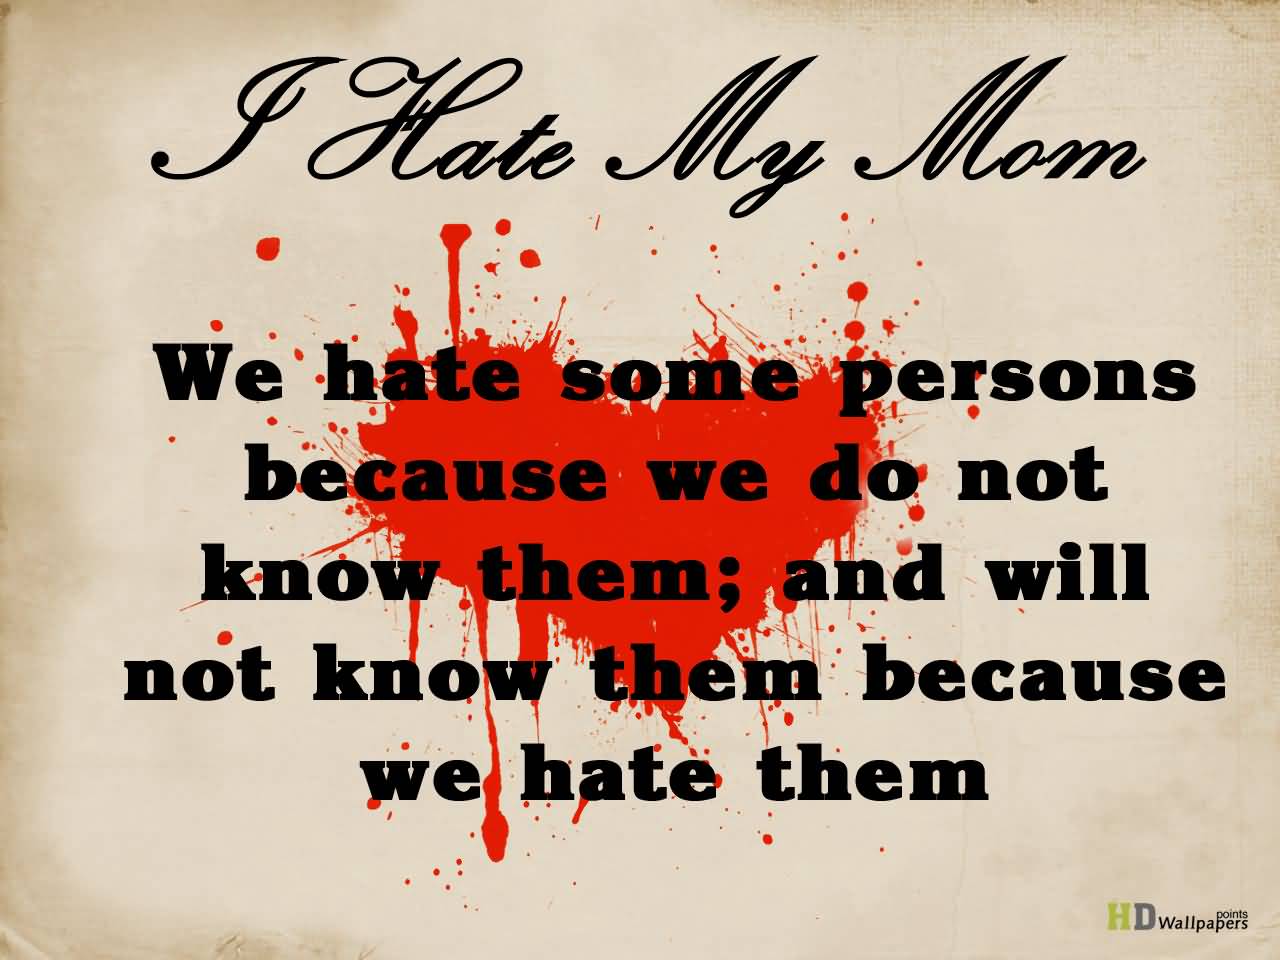 We hate some persons because we do not know them; and we will not know them because we hate them